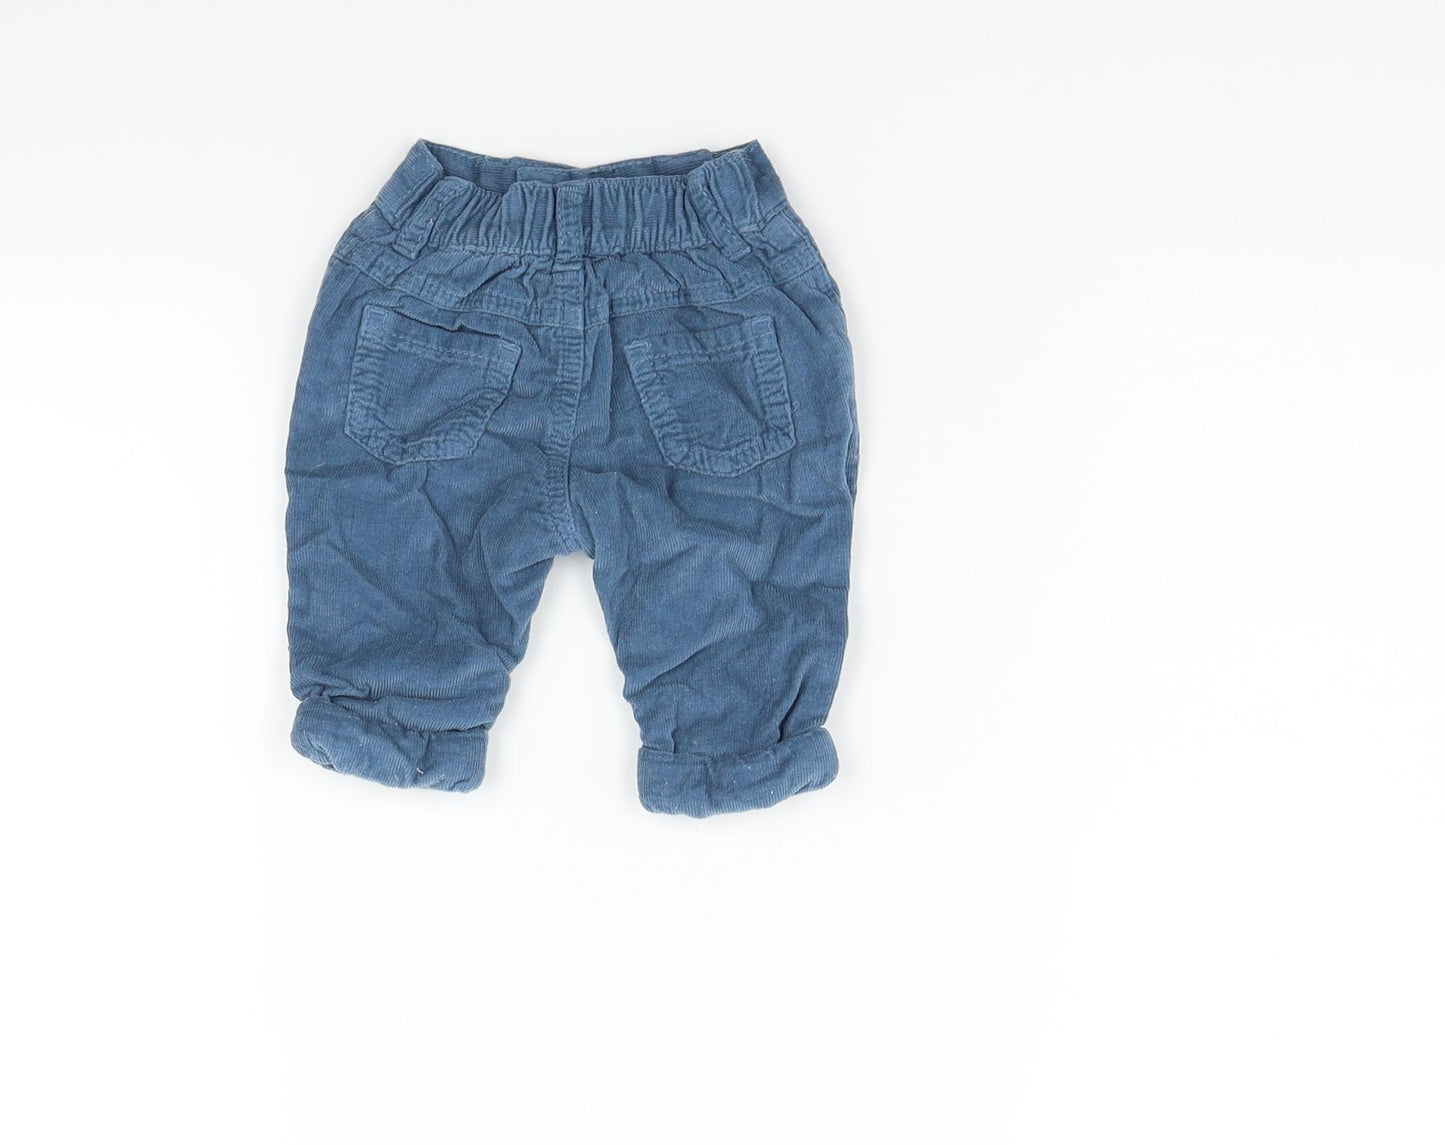 BHS Boys Blue   Cargo Jeans Size 0-3 Months